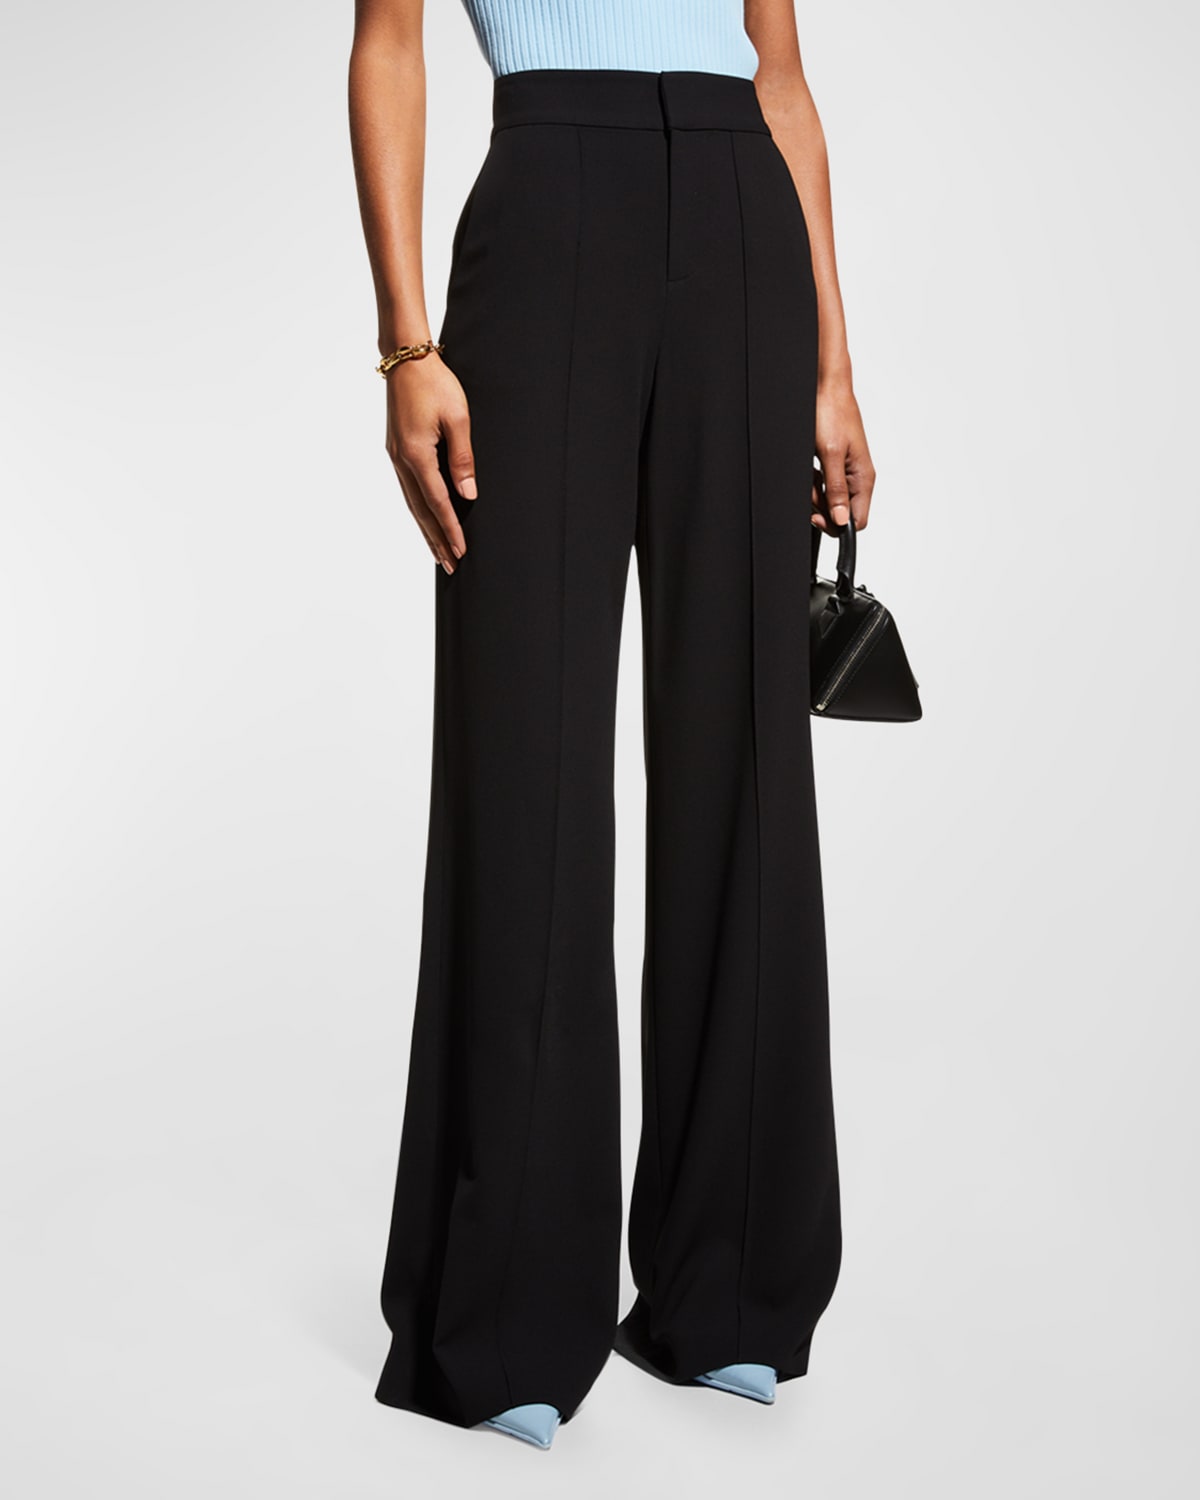 Wide Leg Pants for Women Work Business Casual High Waisted Dress Pants  Solid Baggy Flowy Office Trousers with Pockets